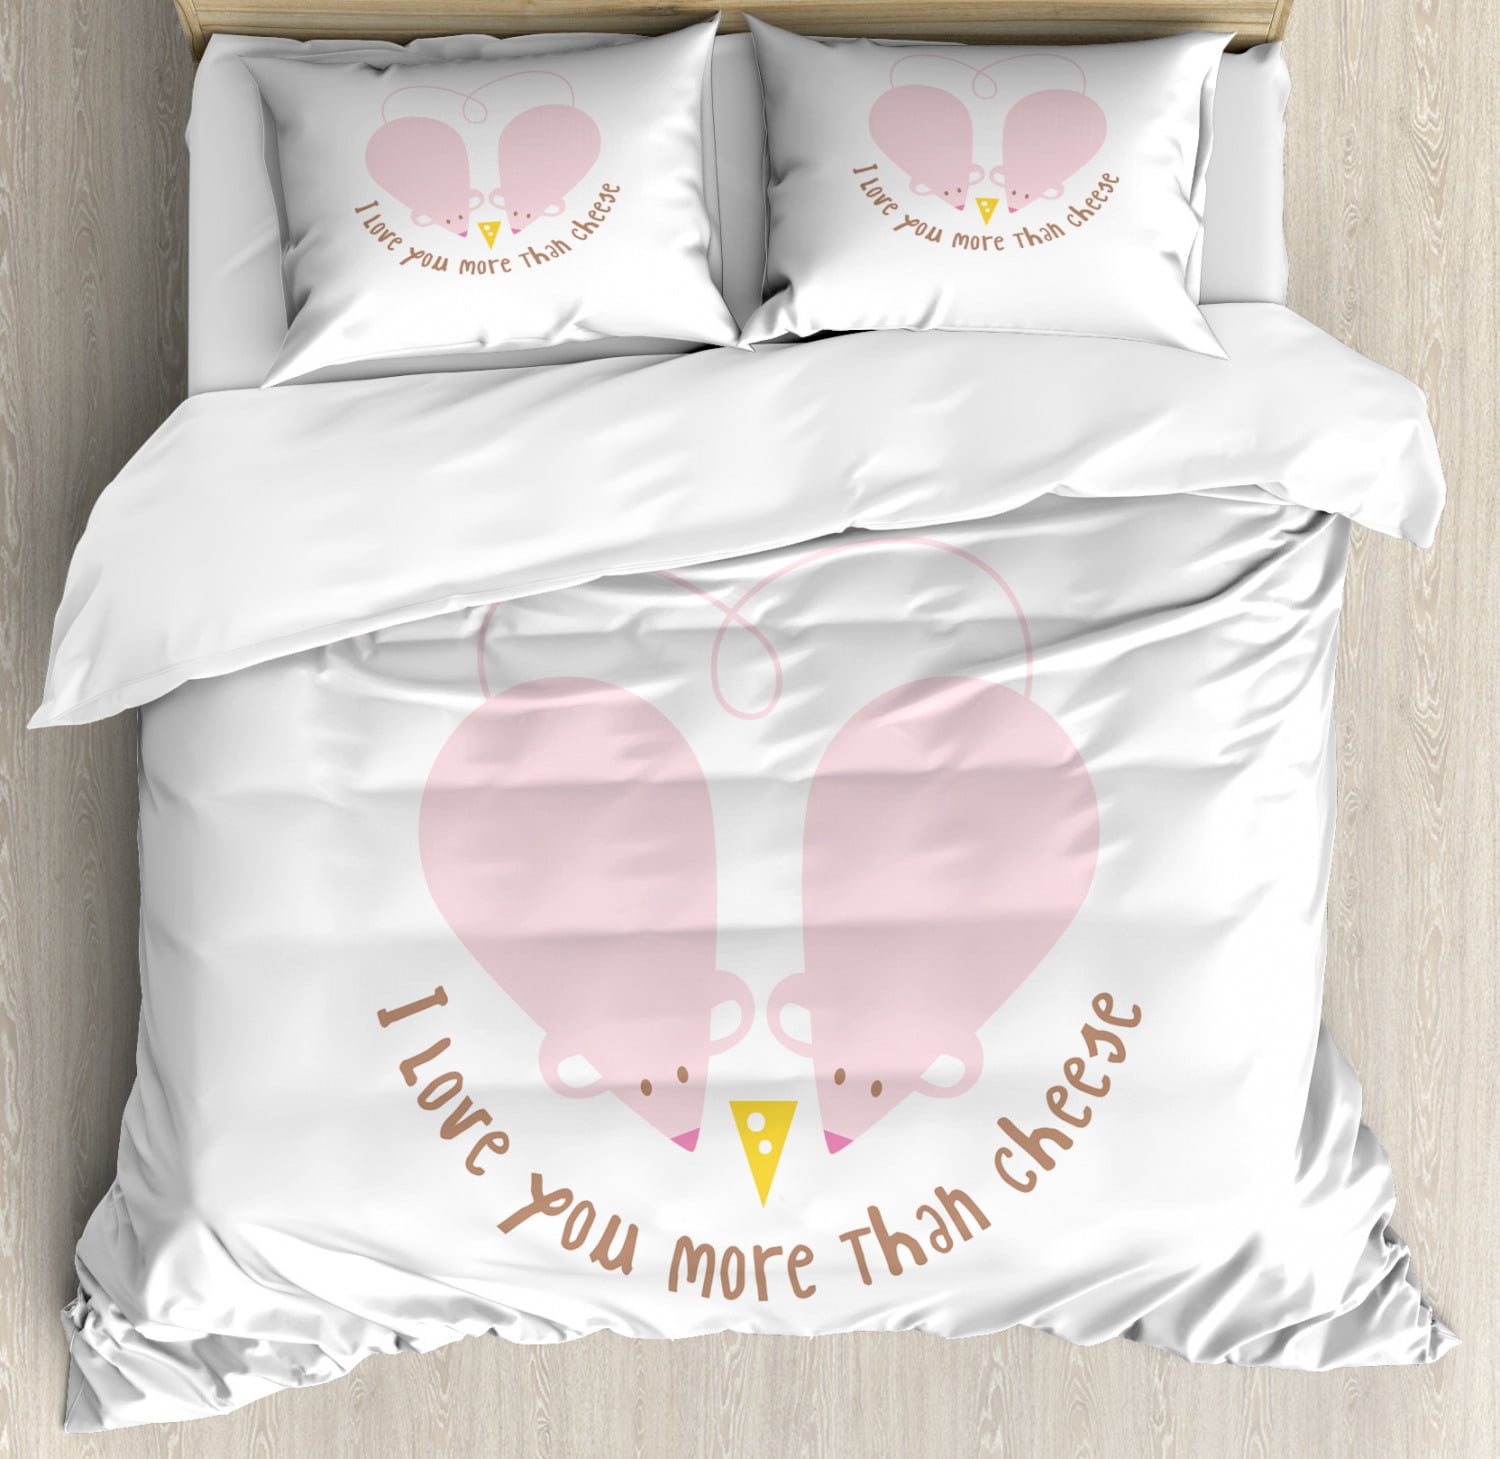 I Love You More King Size Duvet Cover Set Pink Rats With Tangled